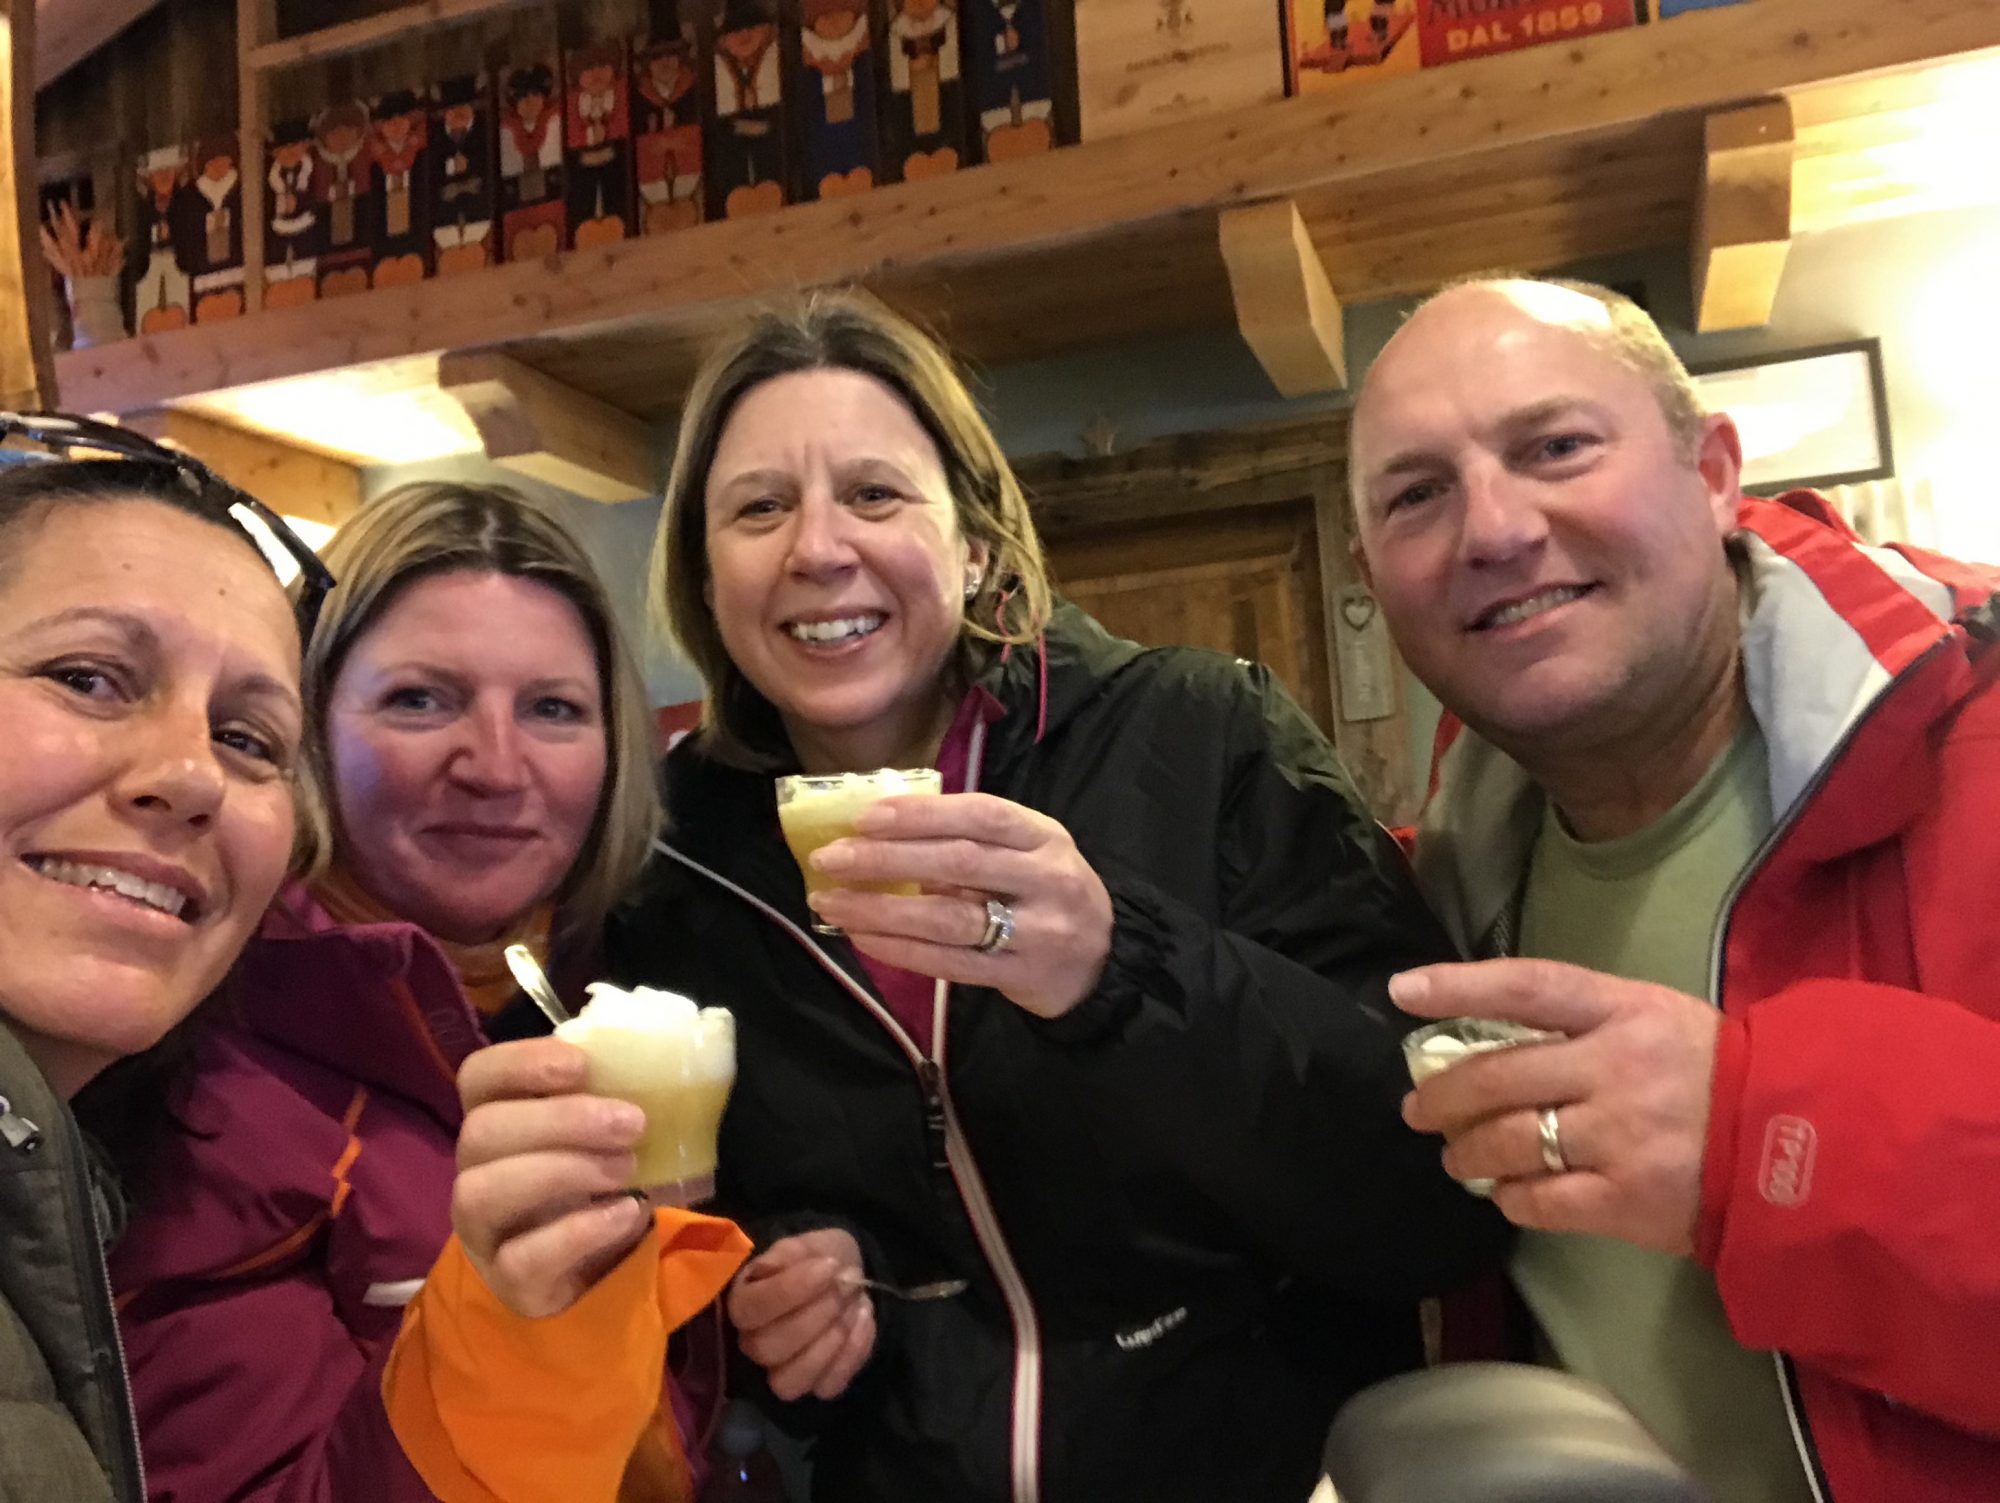 That day finished with no skiing, but at least a bombardino to celebrate my knee and hoping it got better soon enough. Photo: The-Ski-Guru. The Half Term Family Ski Holiday that did not result as planned.